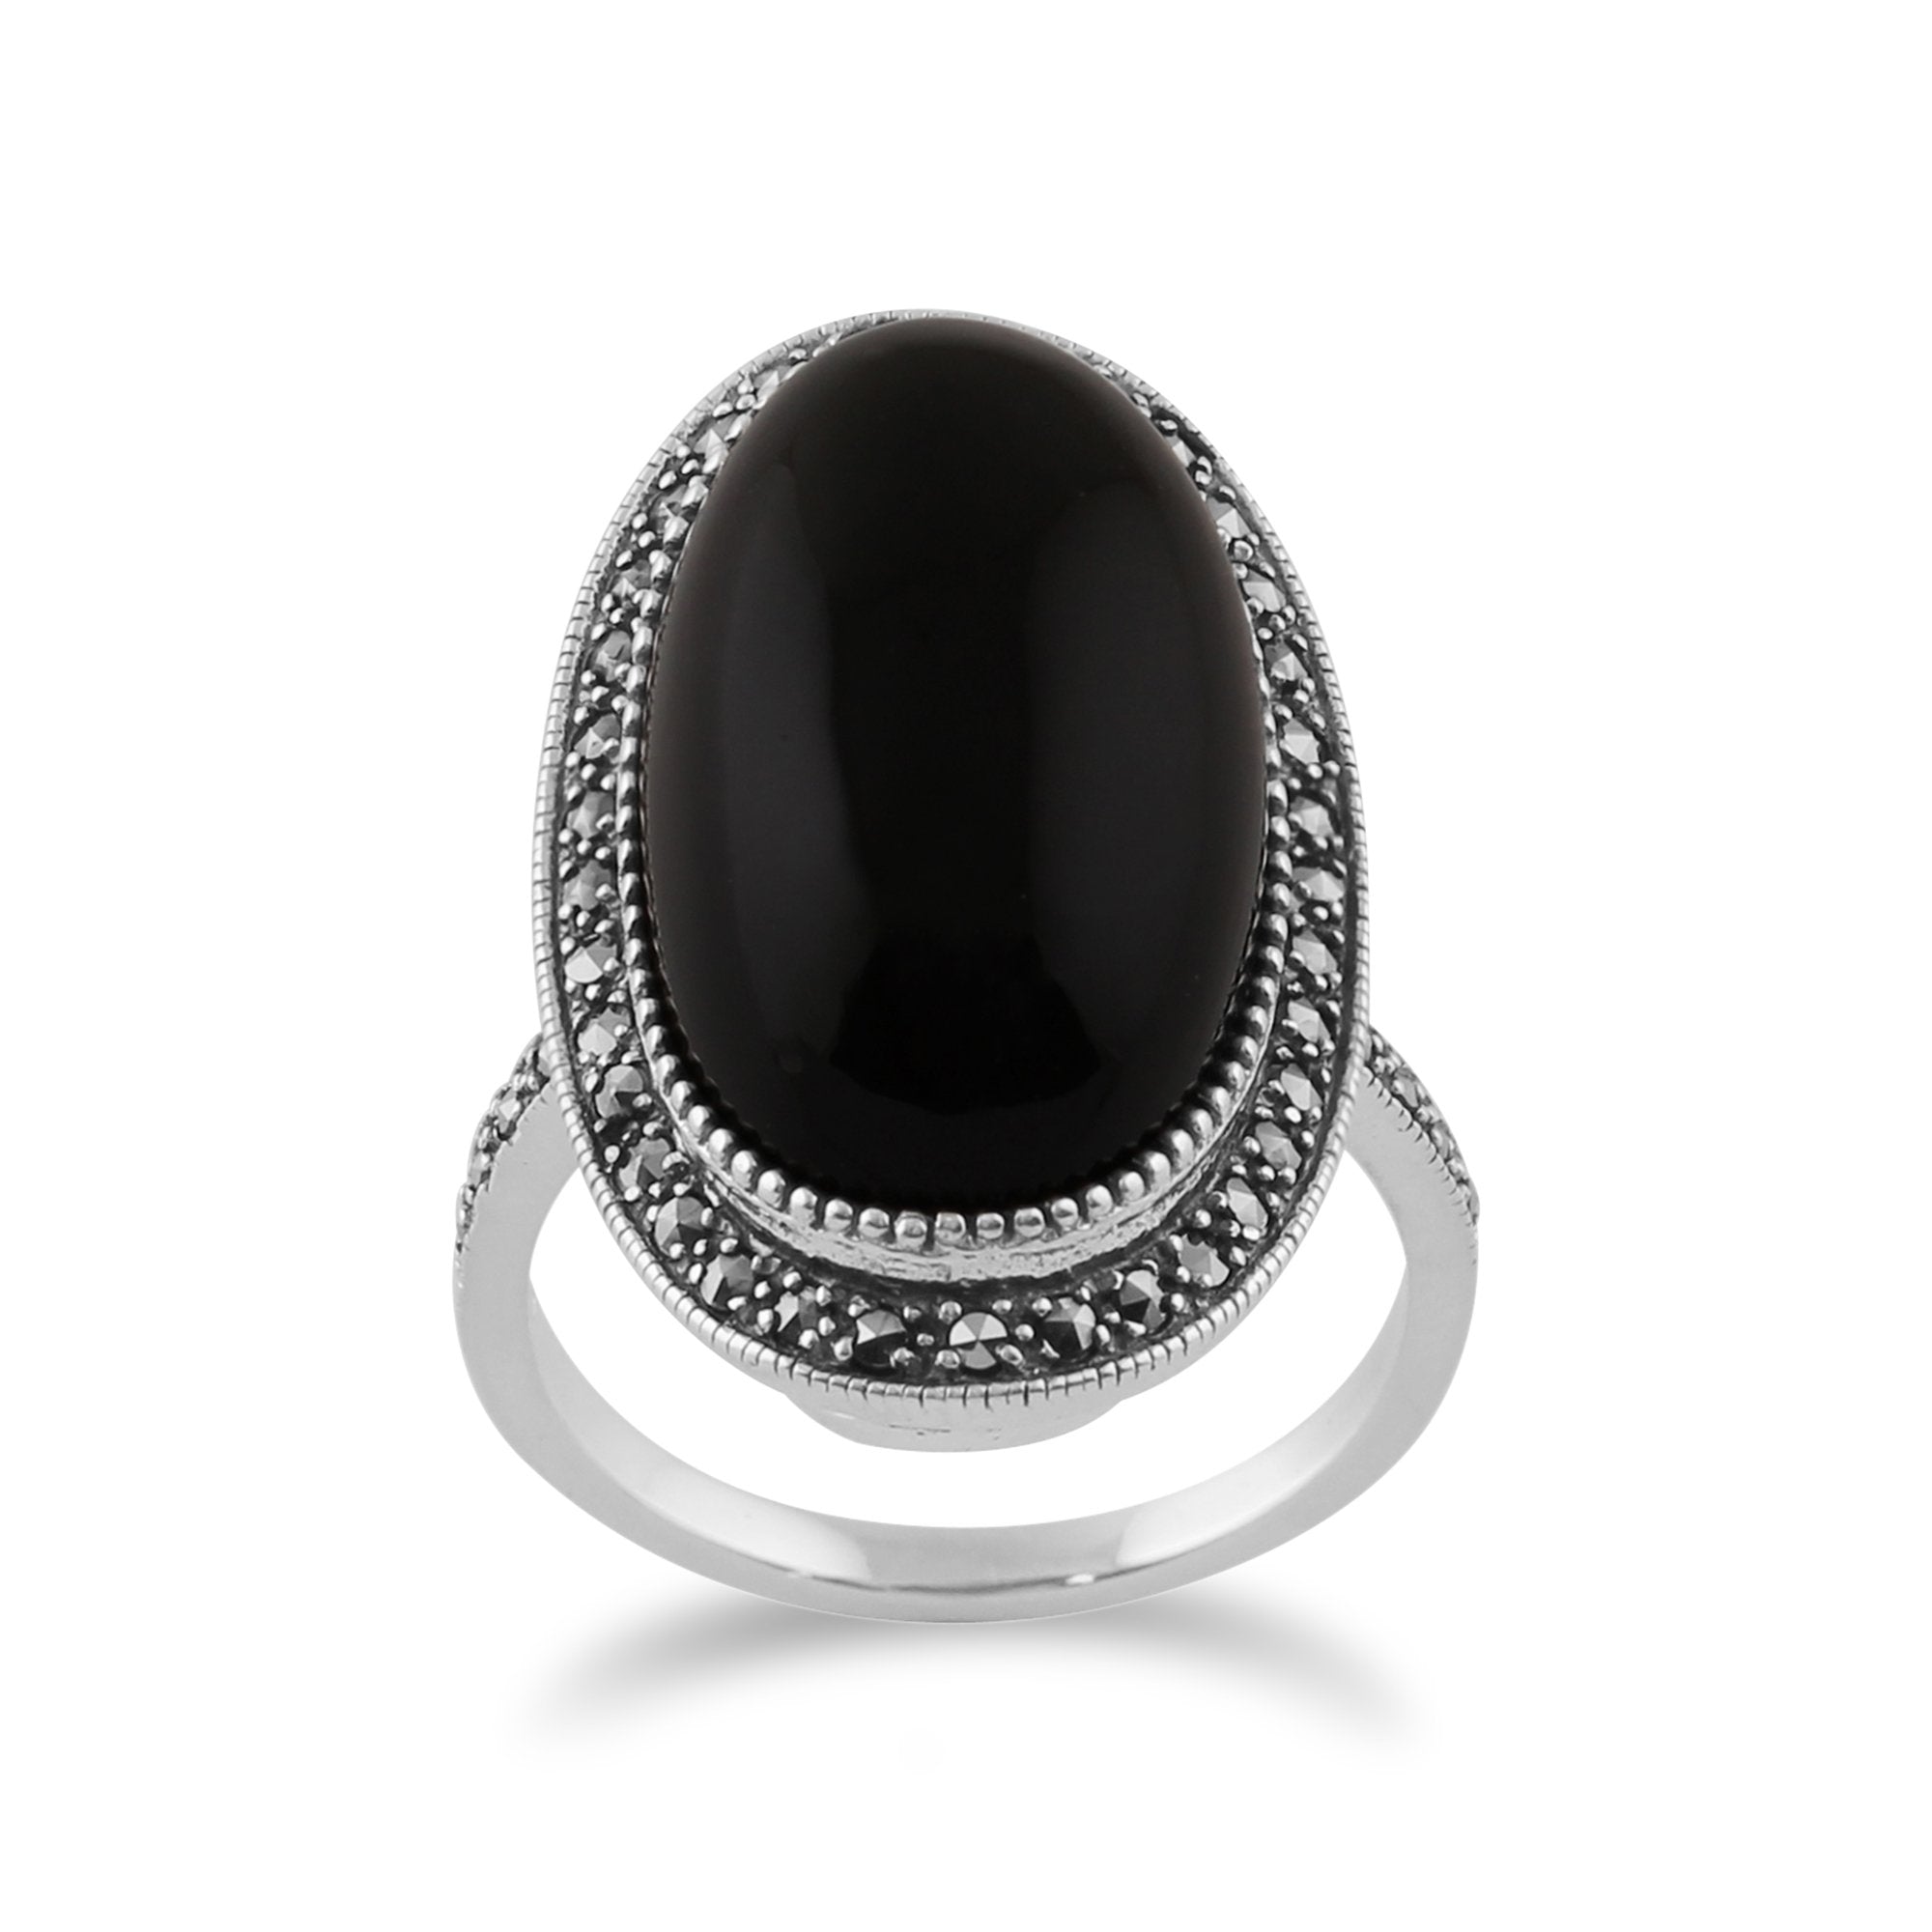 Art Deco Style Black Onyx Cabochon & Marcasite Cocktail Ring